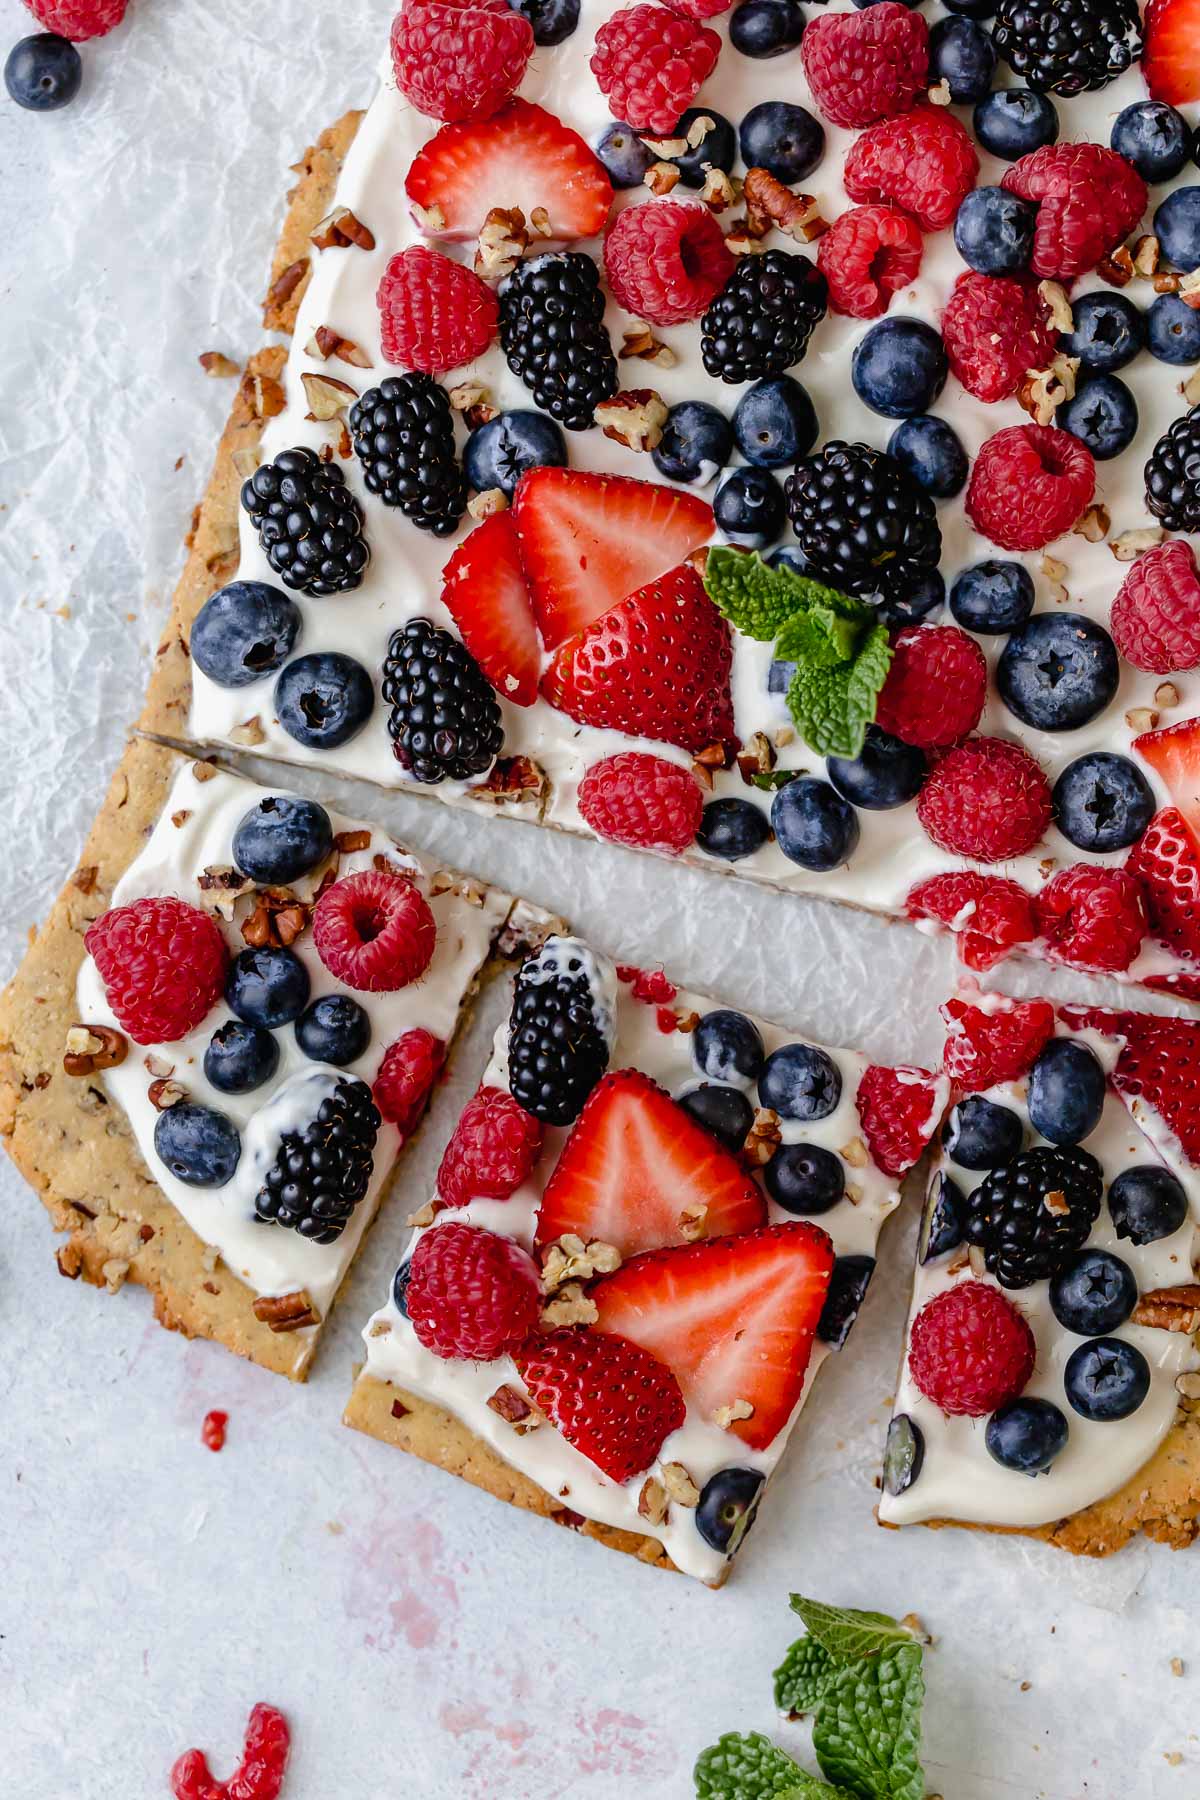 Overhead photo of Gluten-free Berry Fruit Pizza garnished with a sprig of mint in the center.